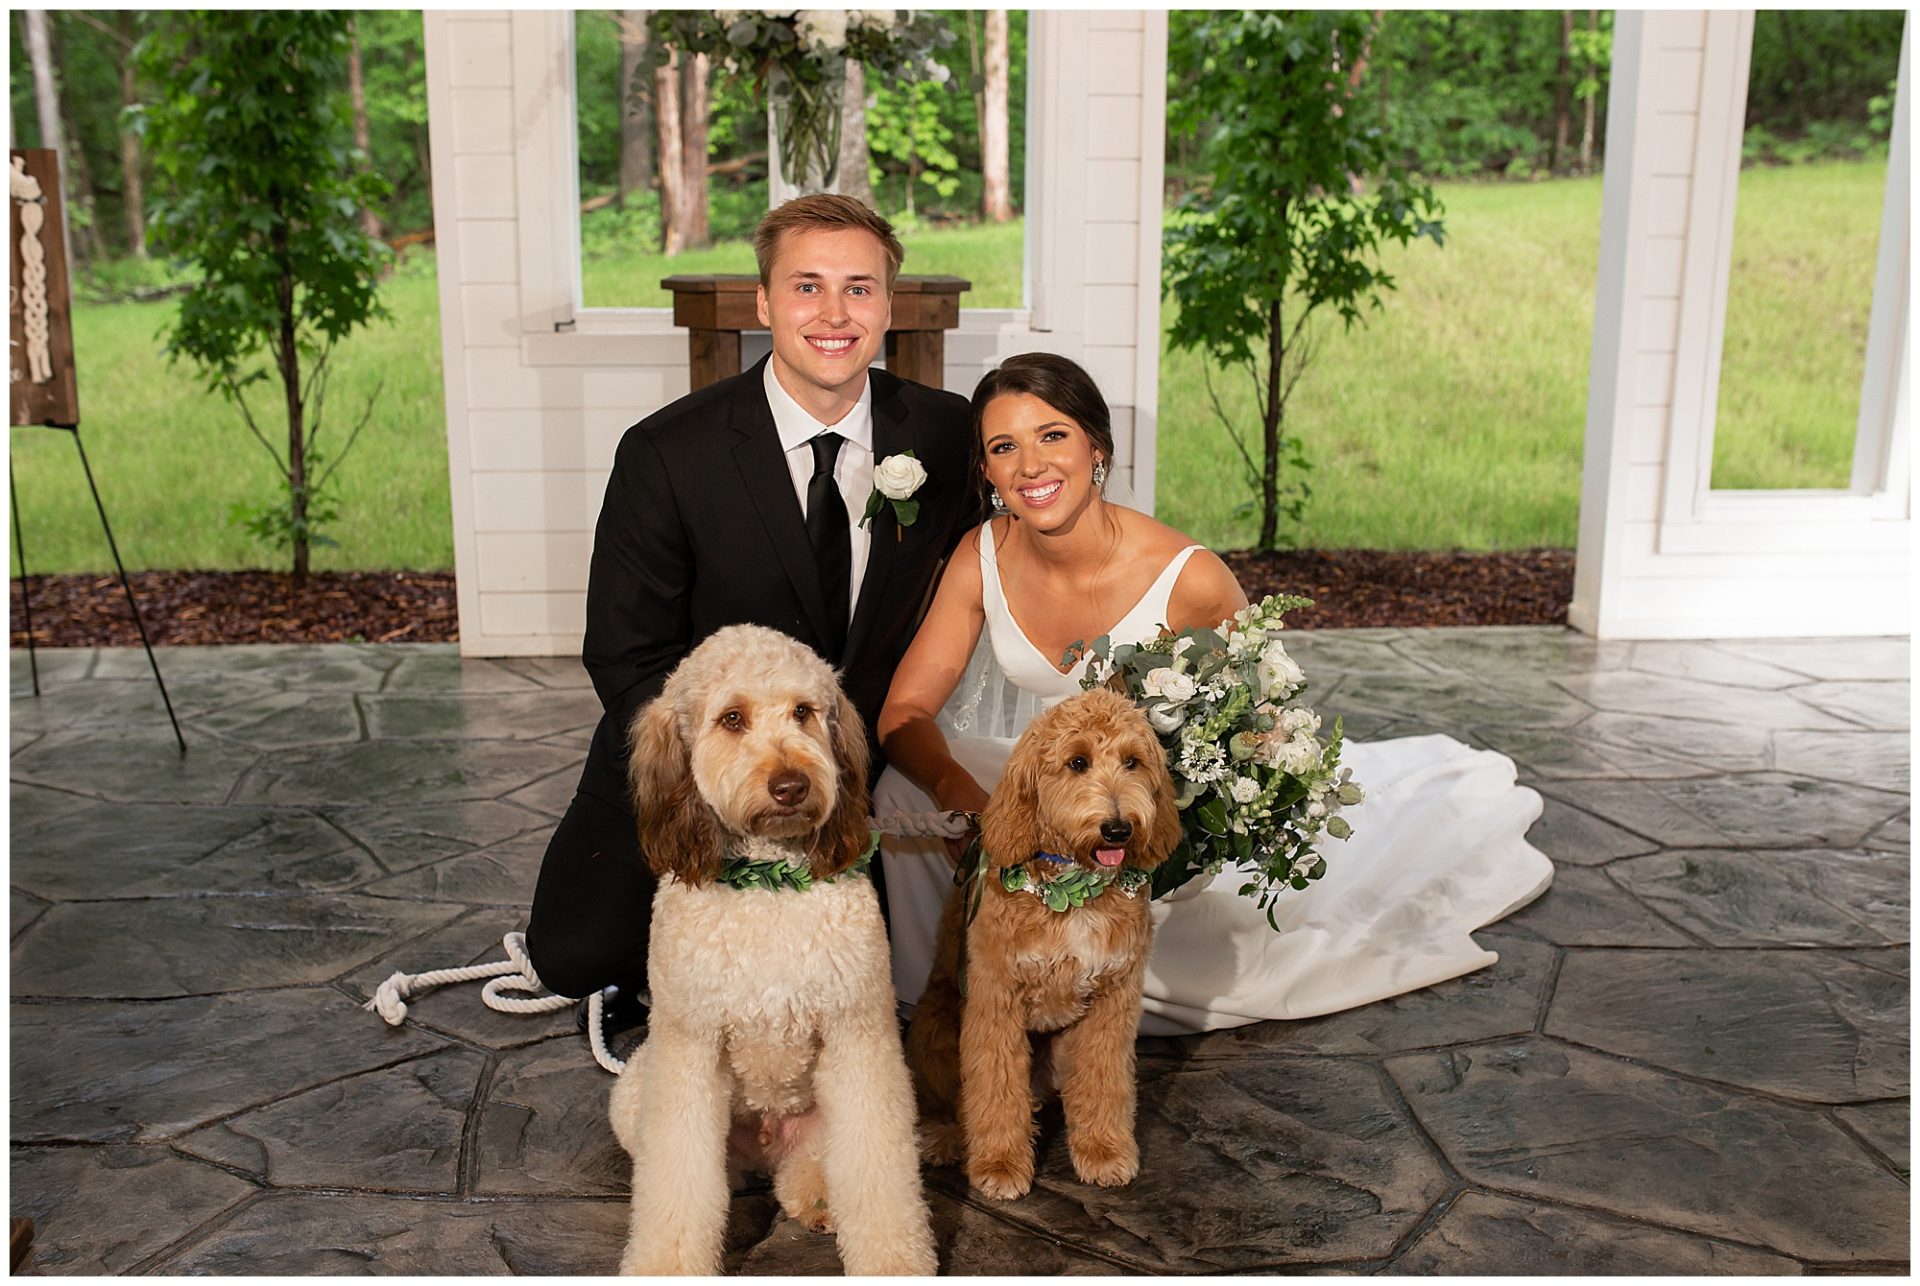 Chapel in the woods, firefly lane wedding, nashville wedding, open air chapel, wedding photos with dogs, golden doodles at the wedding